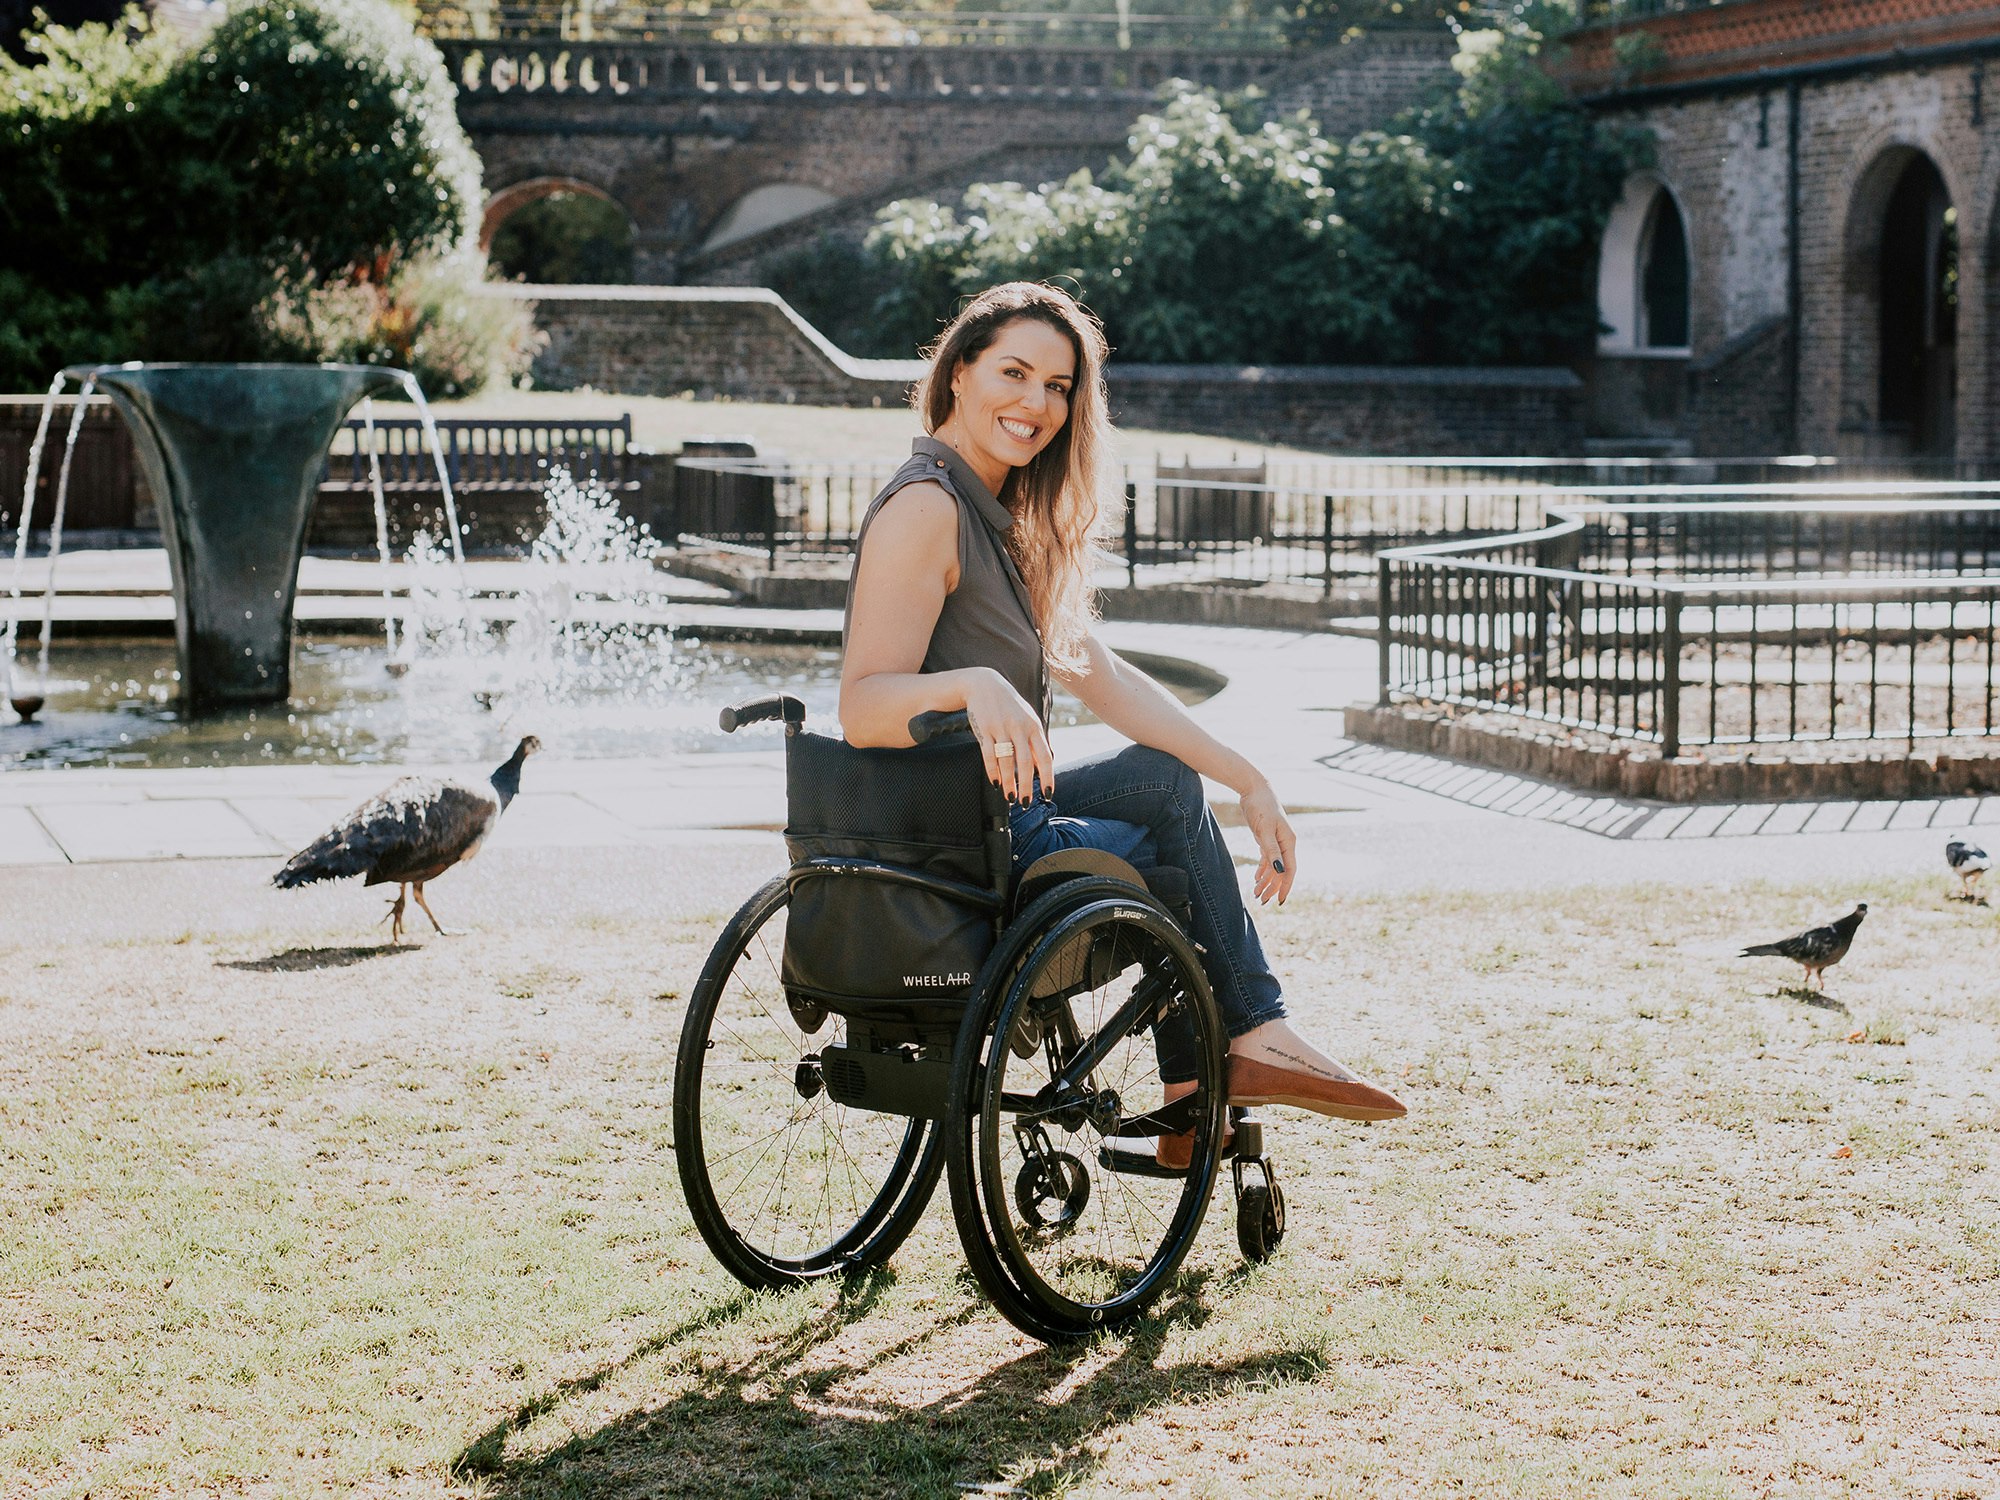 Brand ambassador Samanta Bullock with the wheelAIR cooling backrest cushion that helps users cope with heat and moisture build up [Source: wheelAIR]
